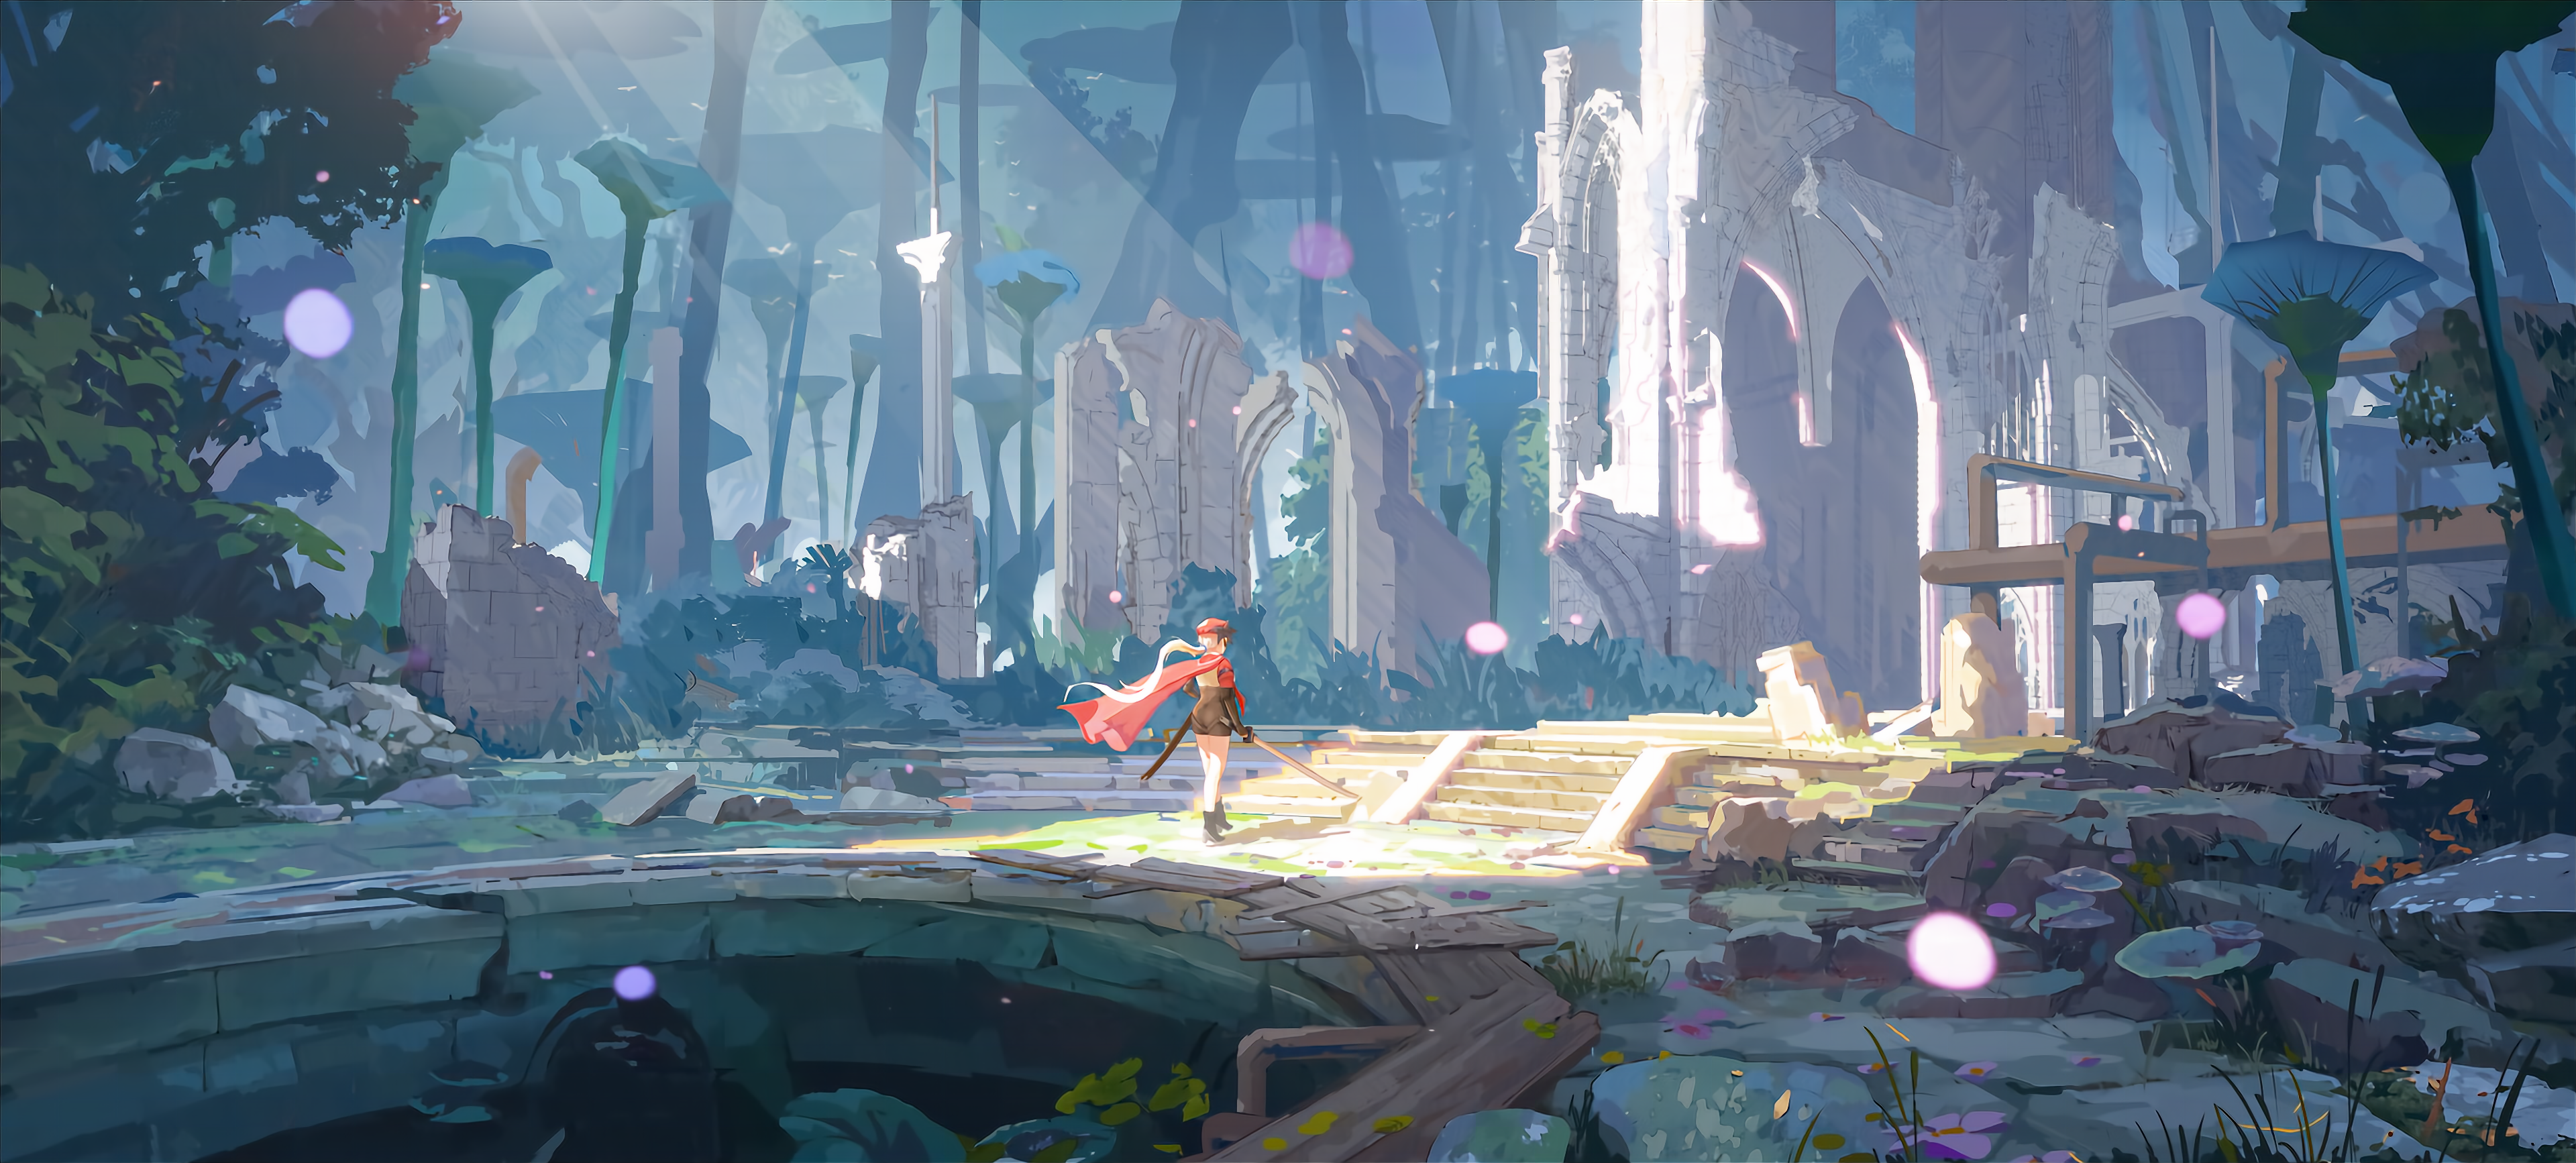 Anime 3840x1734 forest Abandoned city knight anime girls video games concept art